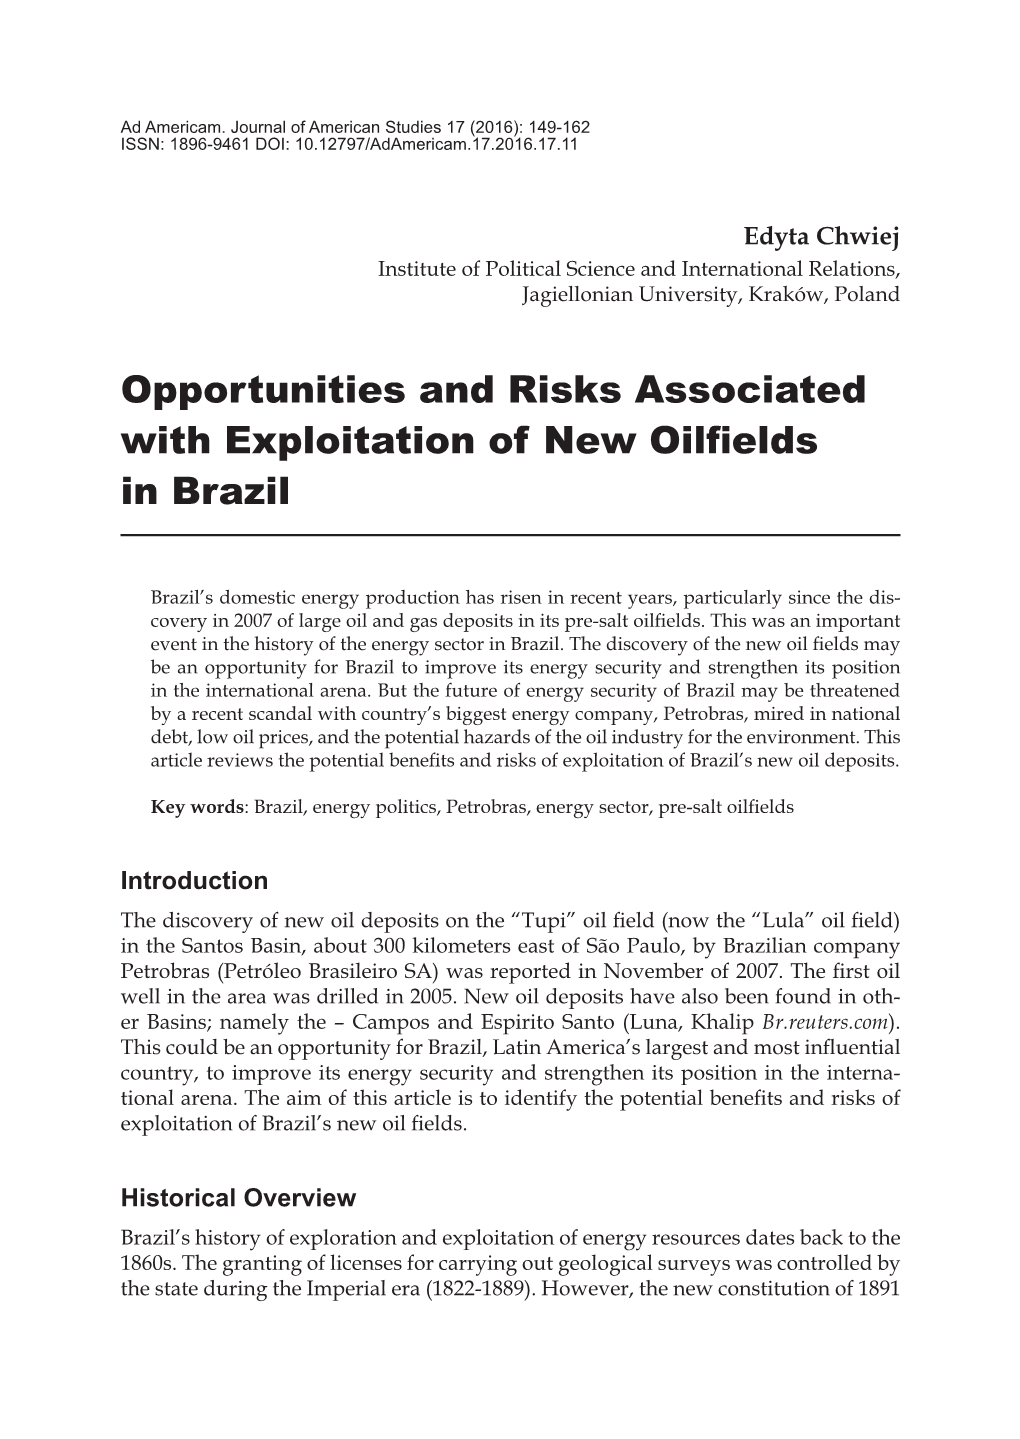 Opportunities and Risks Associated with Exploitation of New Oilfields in Brazil